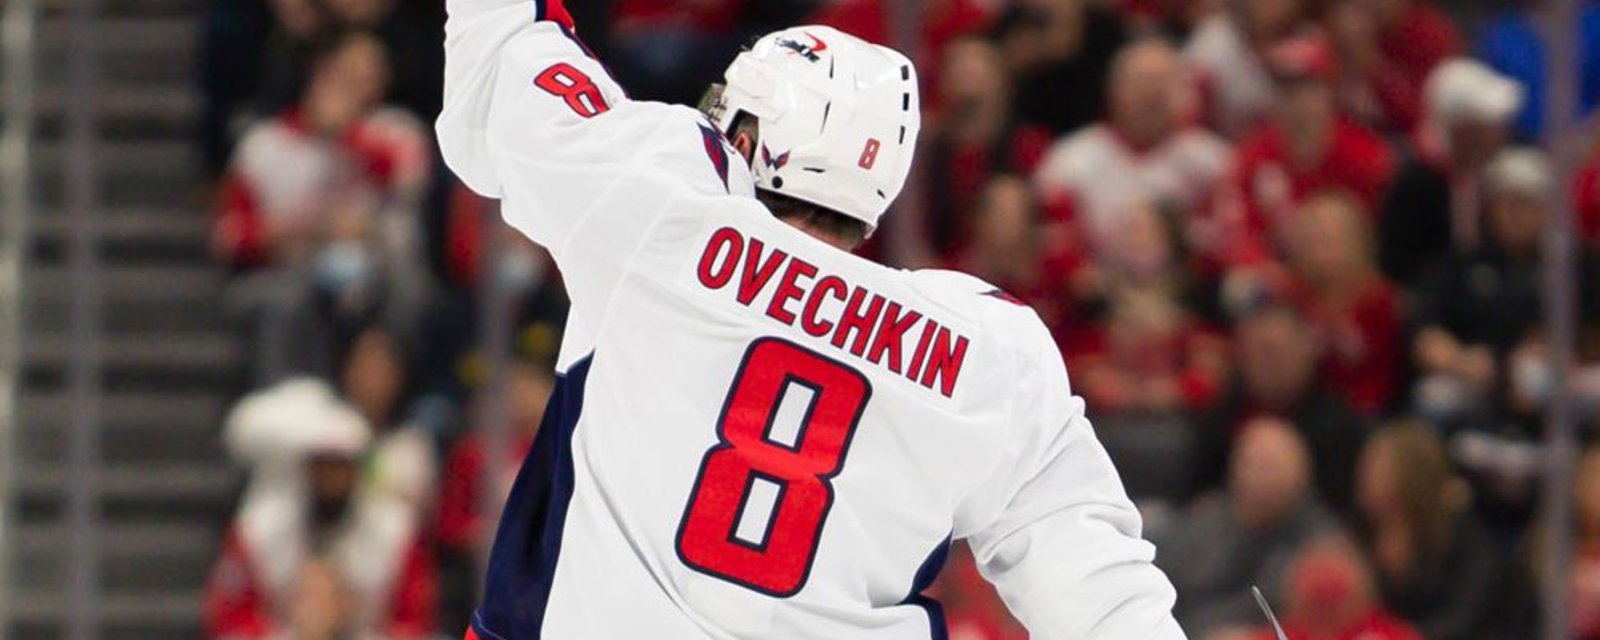 Alex Ovechkin breaks an NHL record with the most 30+ goal seasons in history